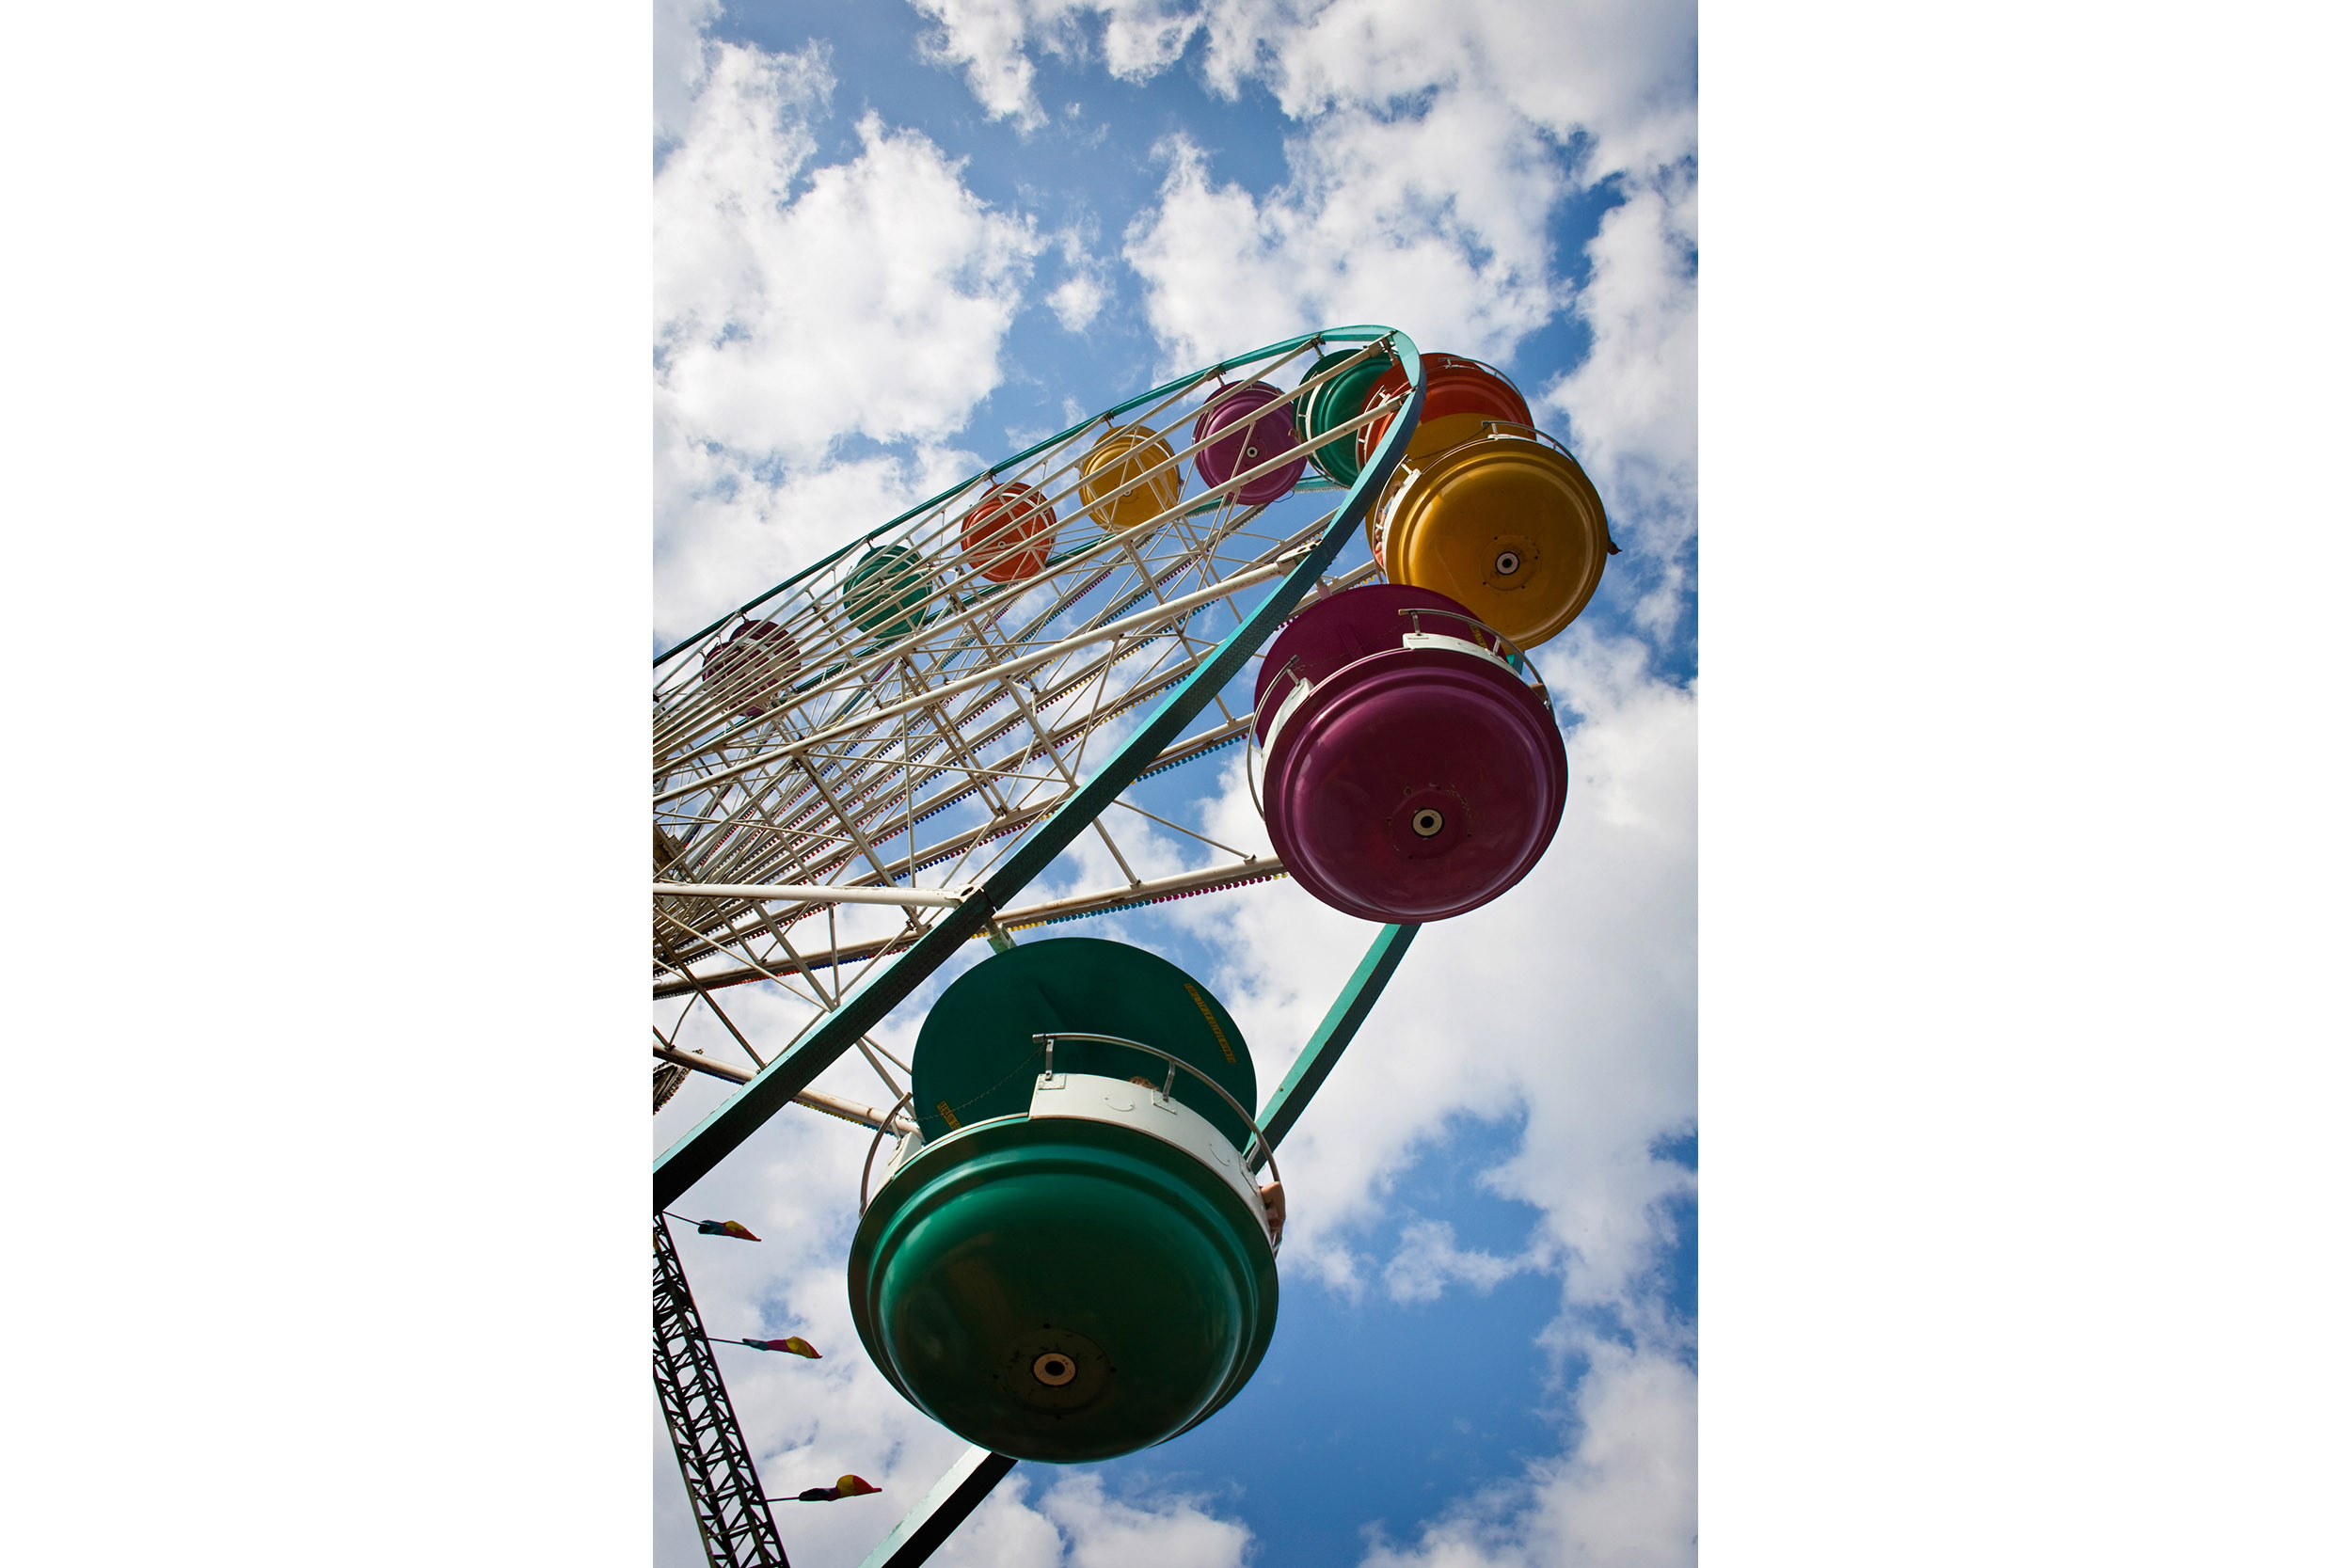 A multi-colored carousel rotates against the carnival’s blue sky